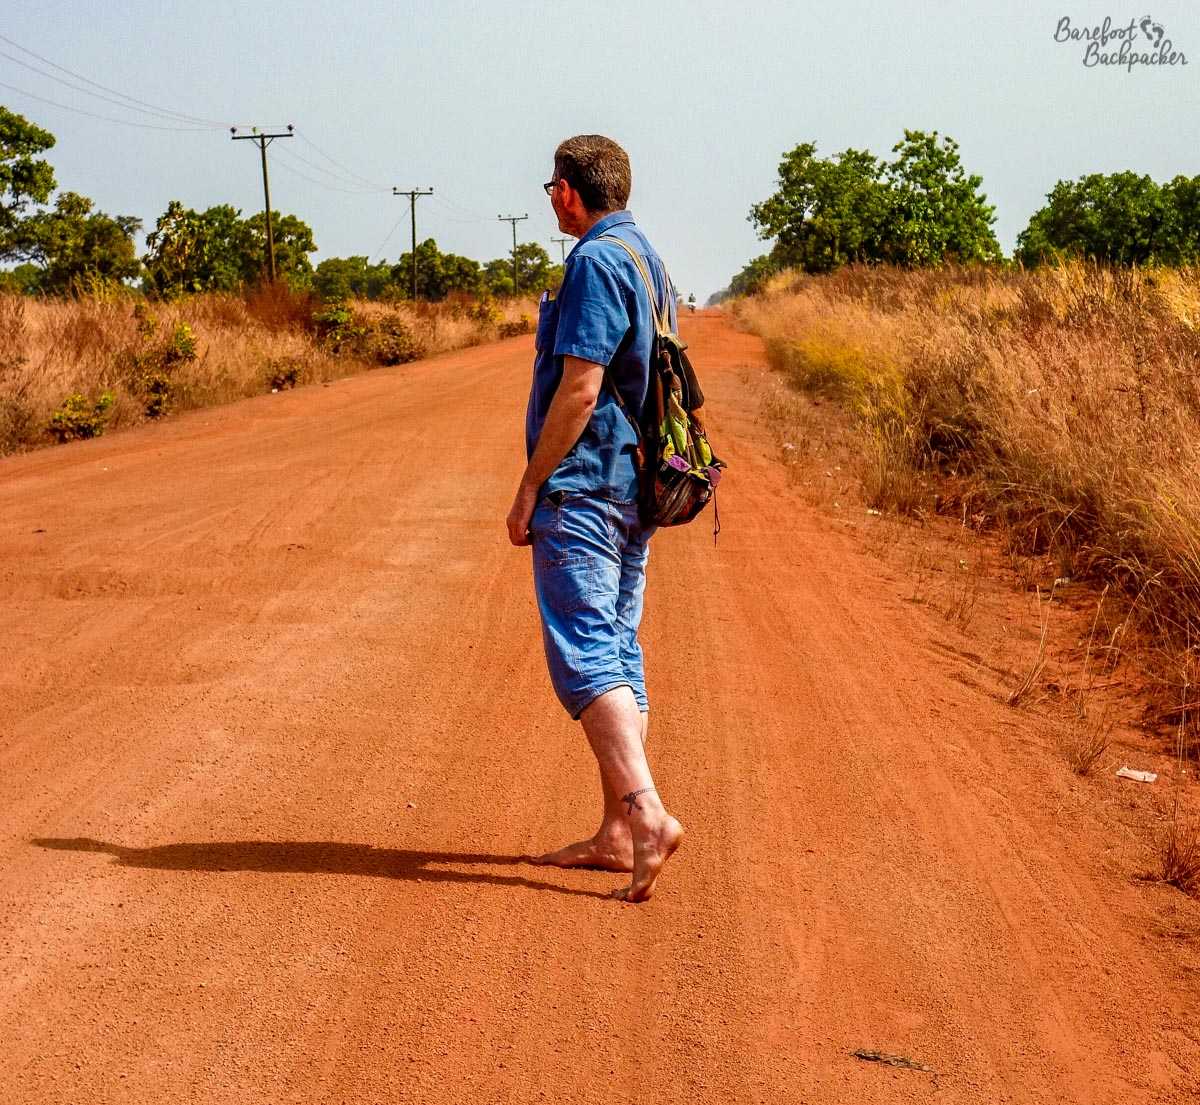 Standing barefoot on an orange gravel road in Ghana, West Africa. The road is lined with small trees but otherwise there is flat nothing. Pic taken, btw, by my moto-driver at the time.